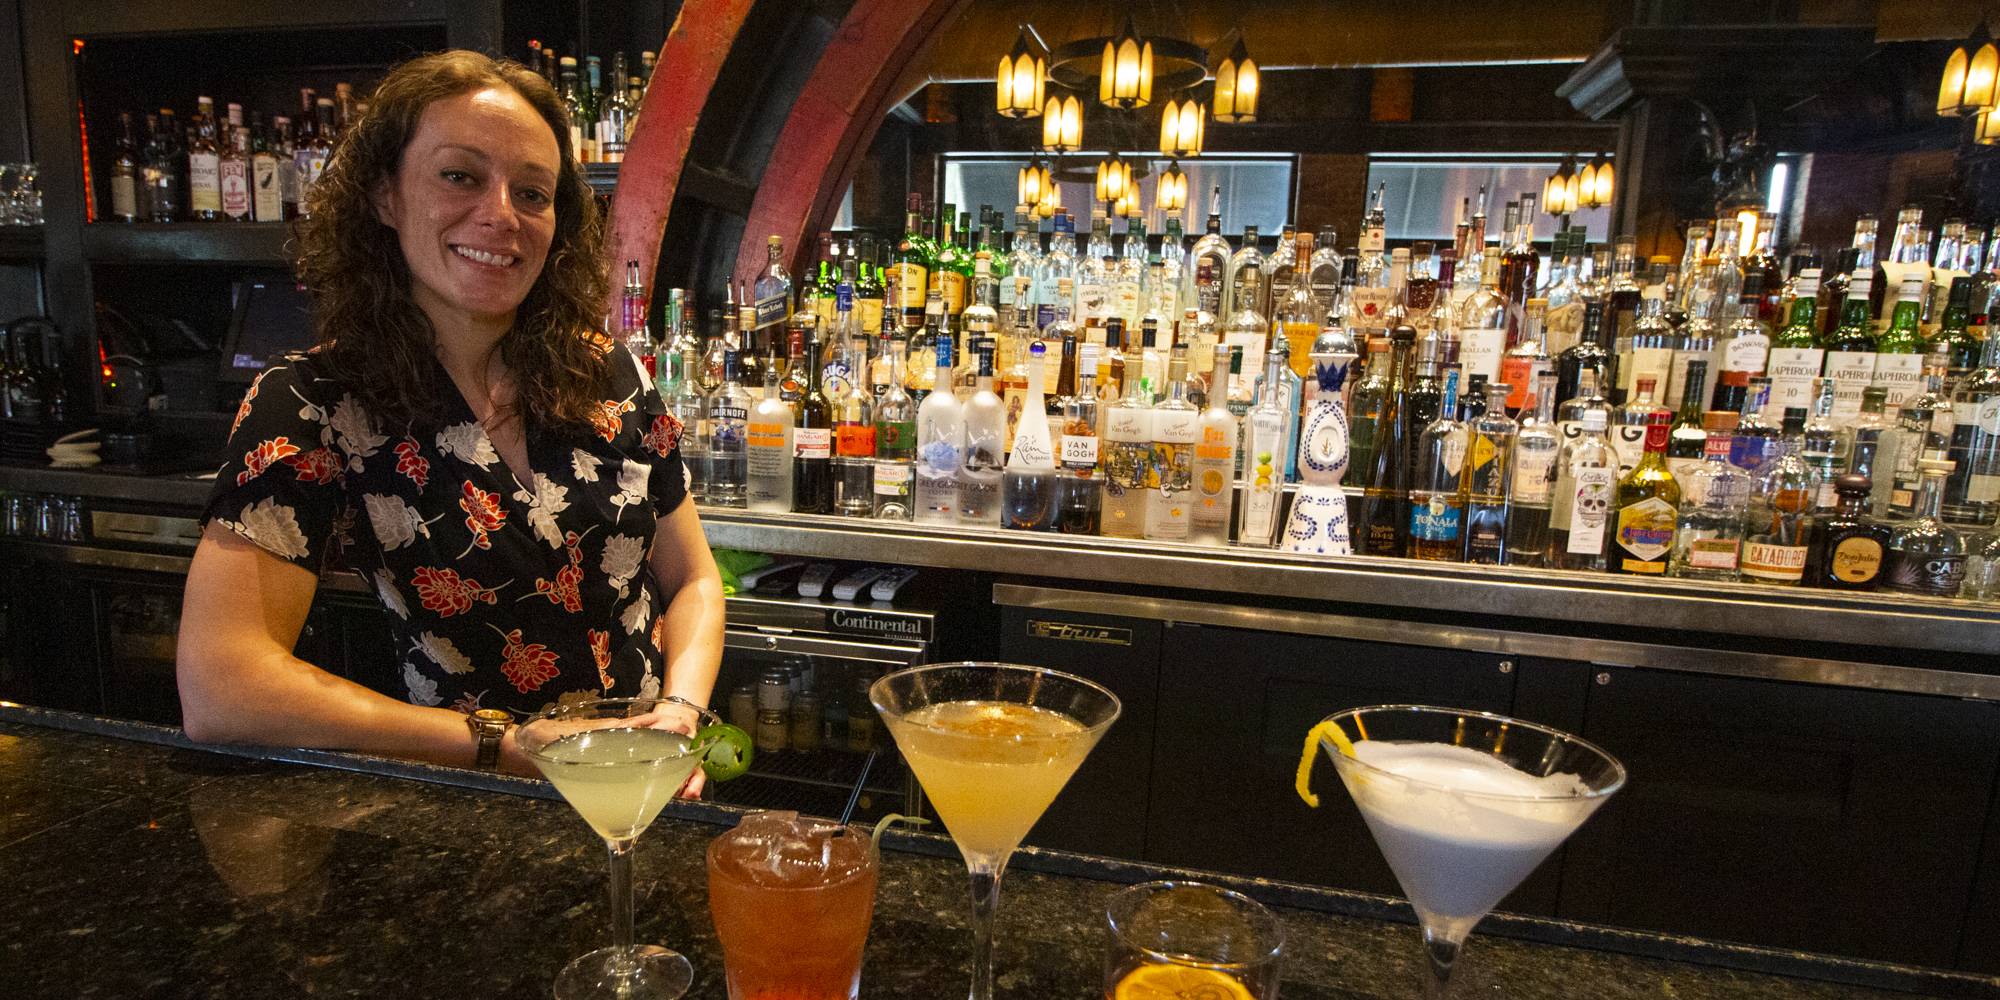 Seven Saints has some seriously good cocktails